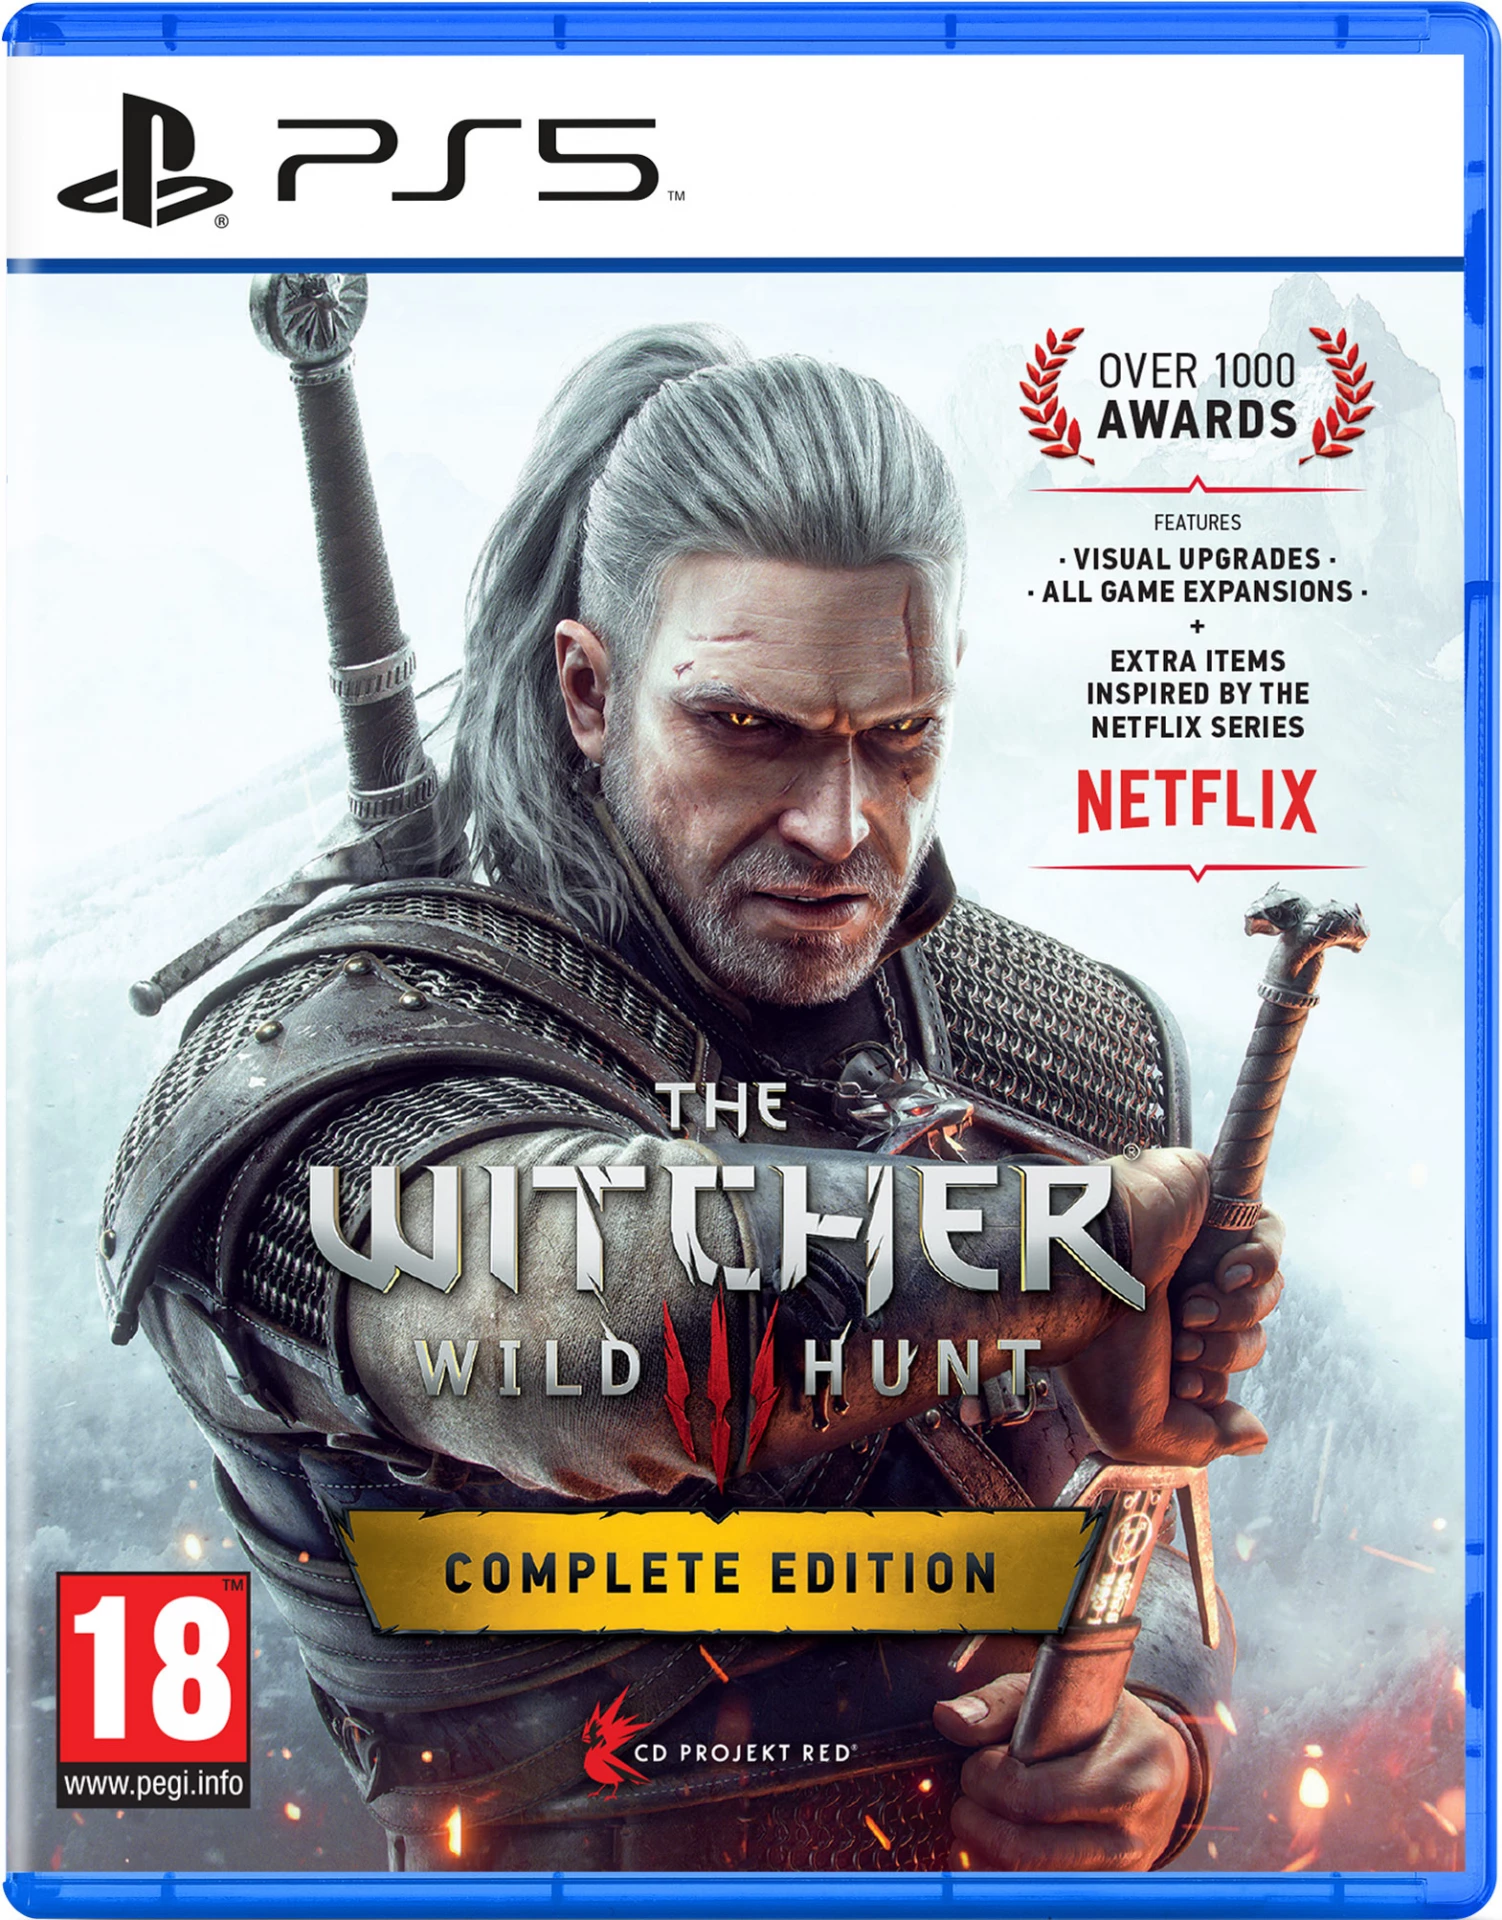 The Witcher 3: Wild Hunt - Complete Edition (PS5), CD Projekt Red